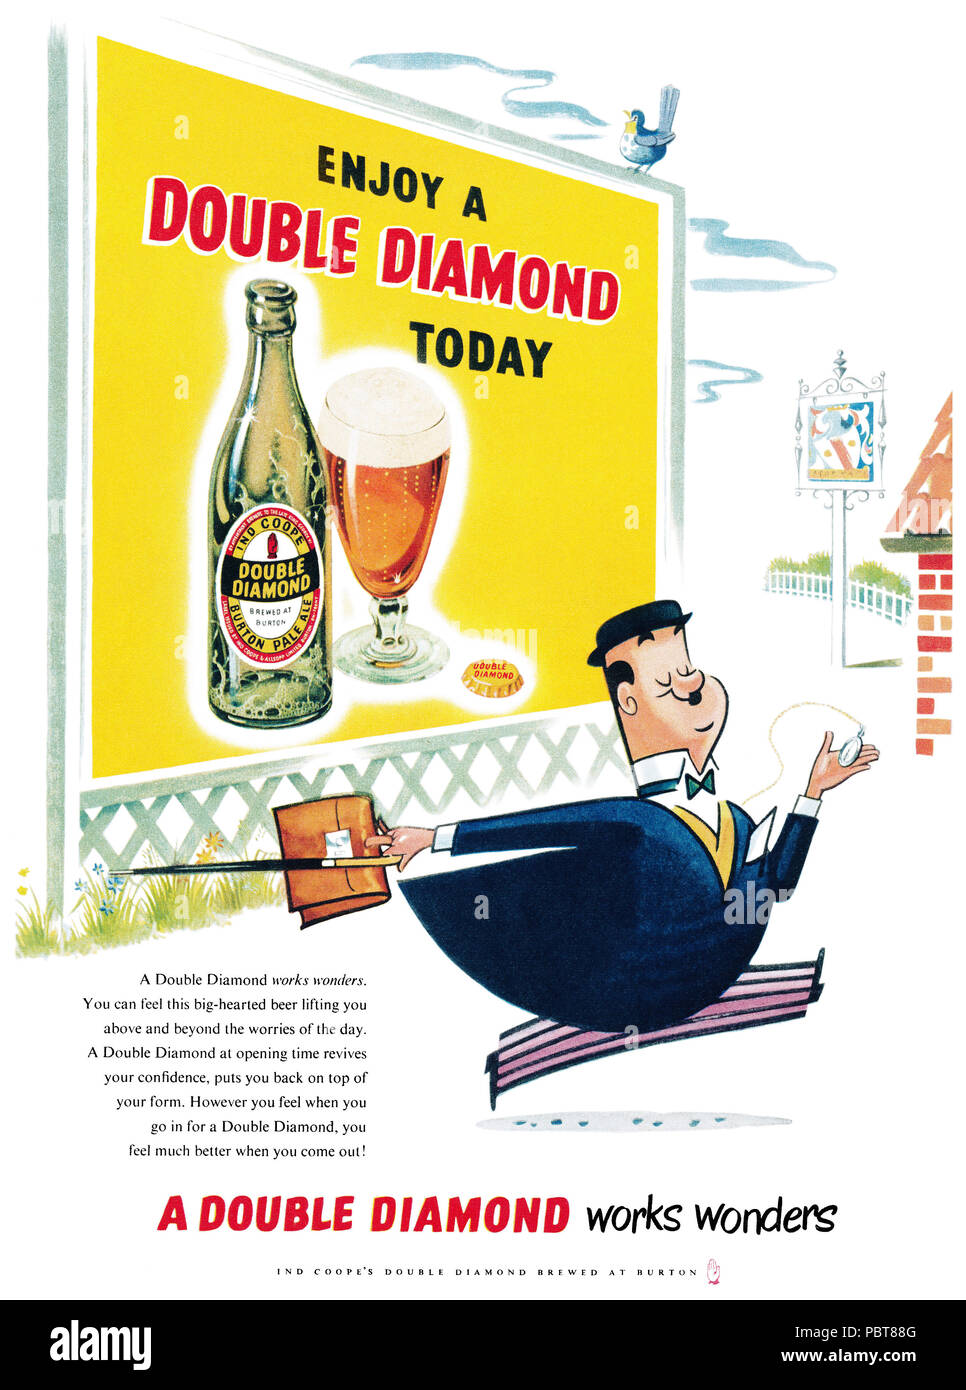 1954 British advertisement for Ind Coope Double Diamond Burton pale ale. Stock Photo